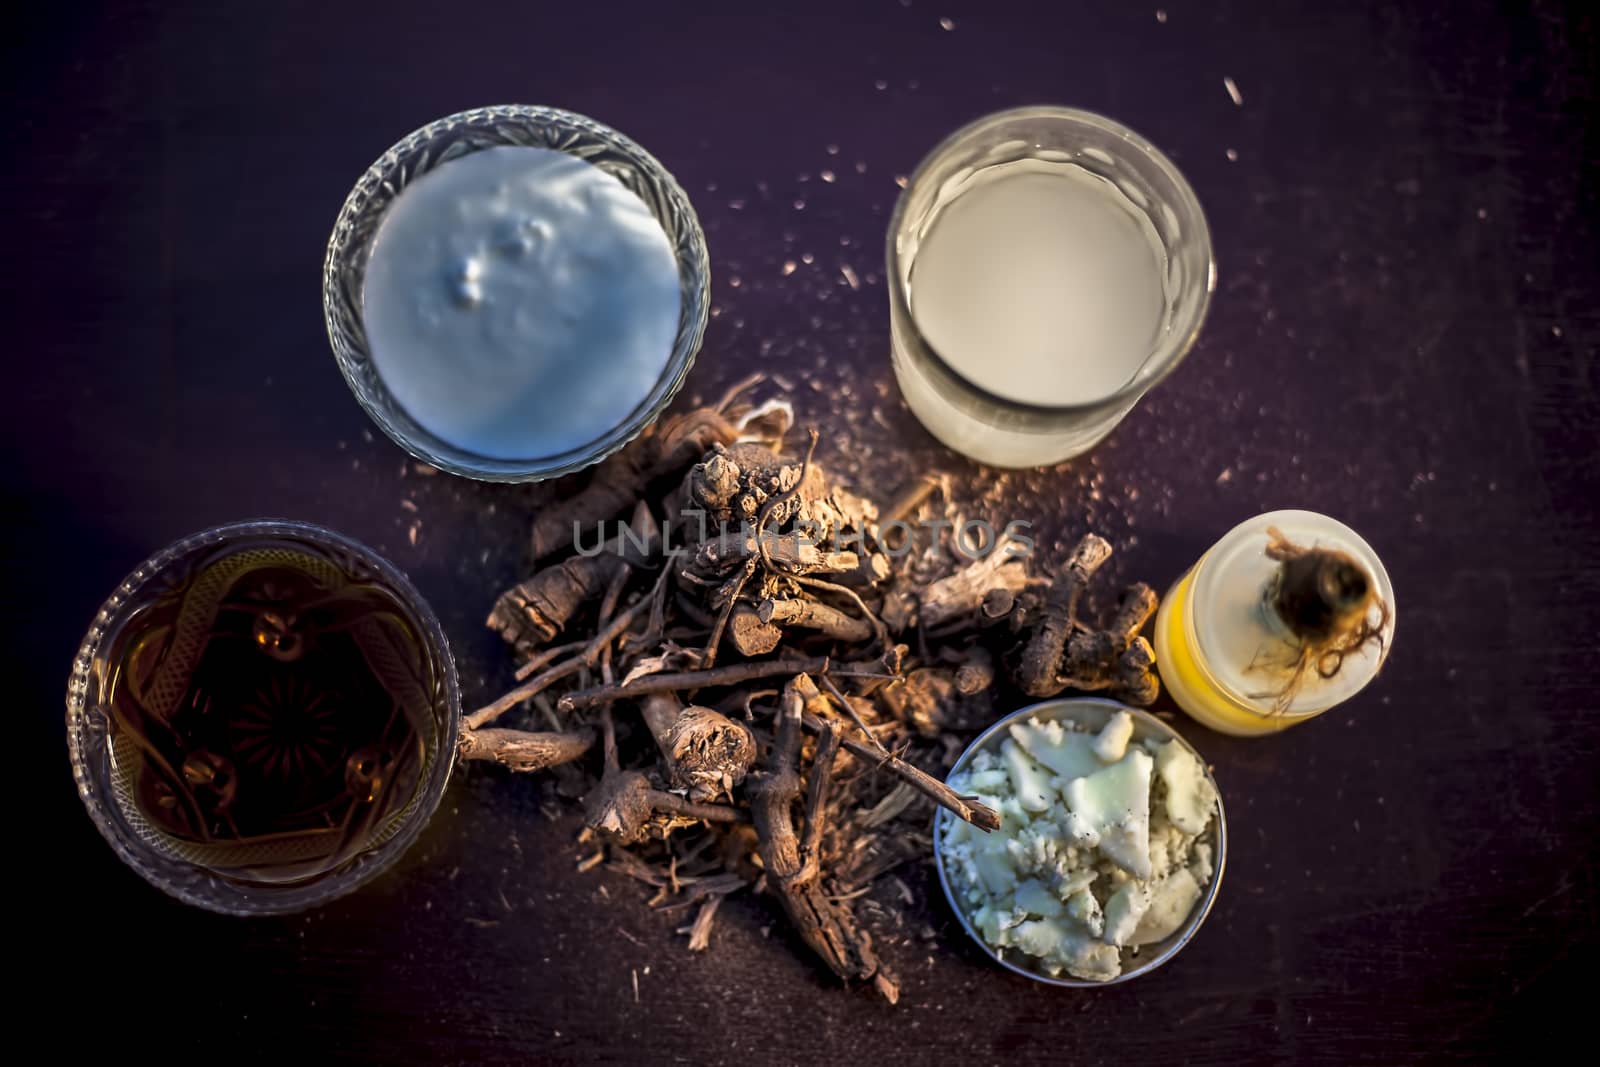 Raw ayurvedic herb chitrak/Plumbago zeylanica roots on the brown-colored shiny surface with some buttermilk, ghee or clarified butter, its extract, curd, and honey with it used in ayurvedic therapy.